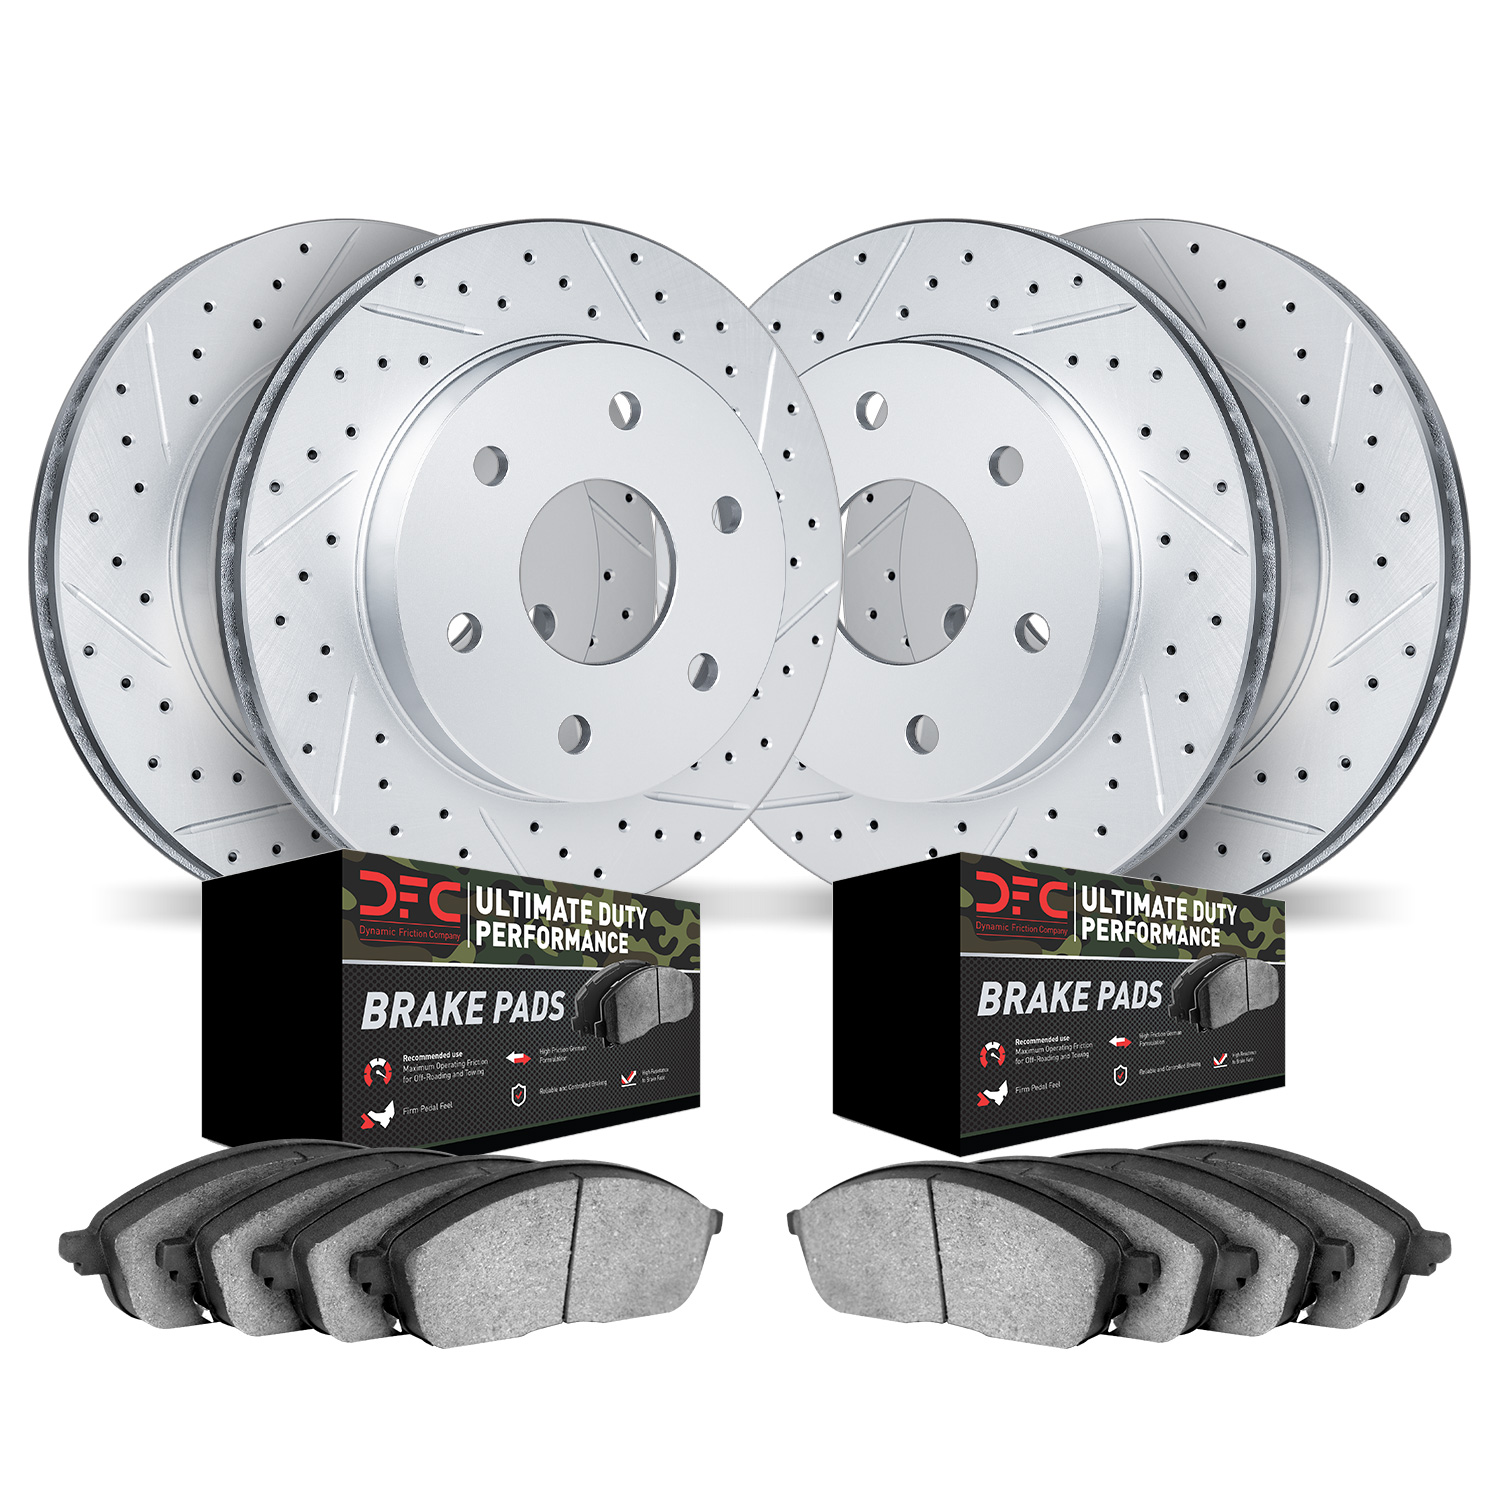 2404-76004 Geoperformance Drilled/Slotted Brake Rotors with Ultimate-Duty Brake Pads Kit, 2003-2009 Lexus/Toyota/Scion, Position